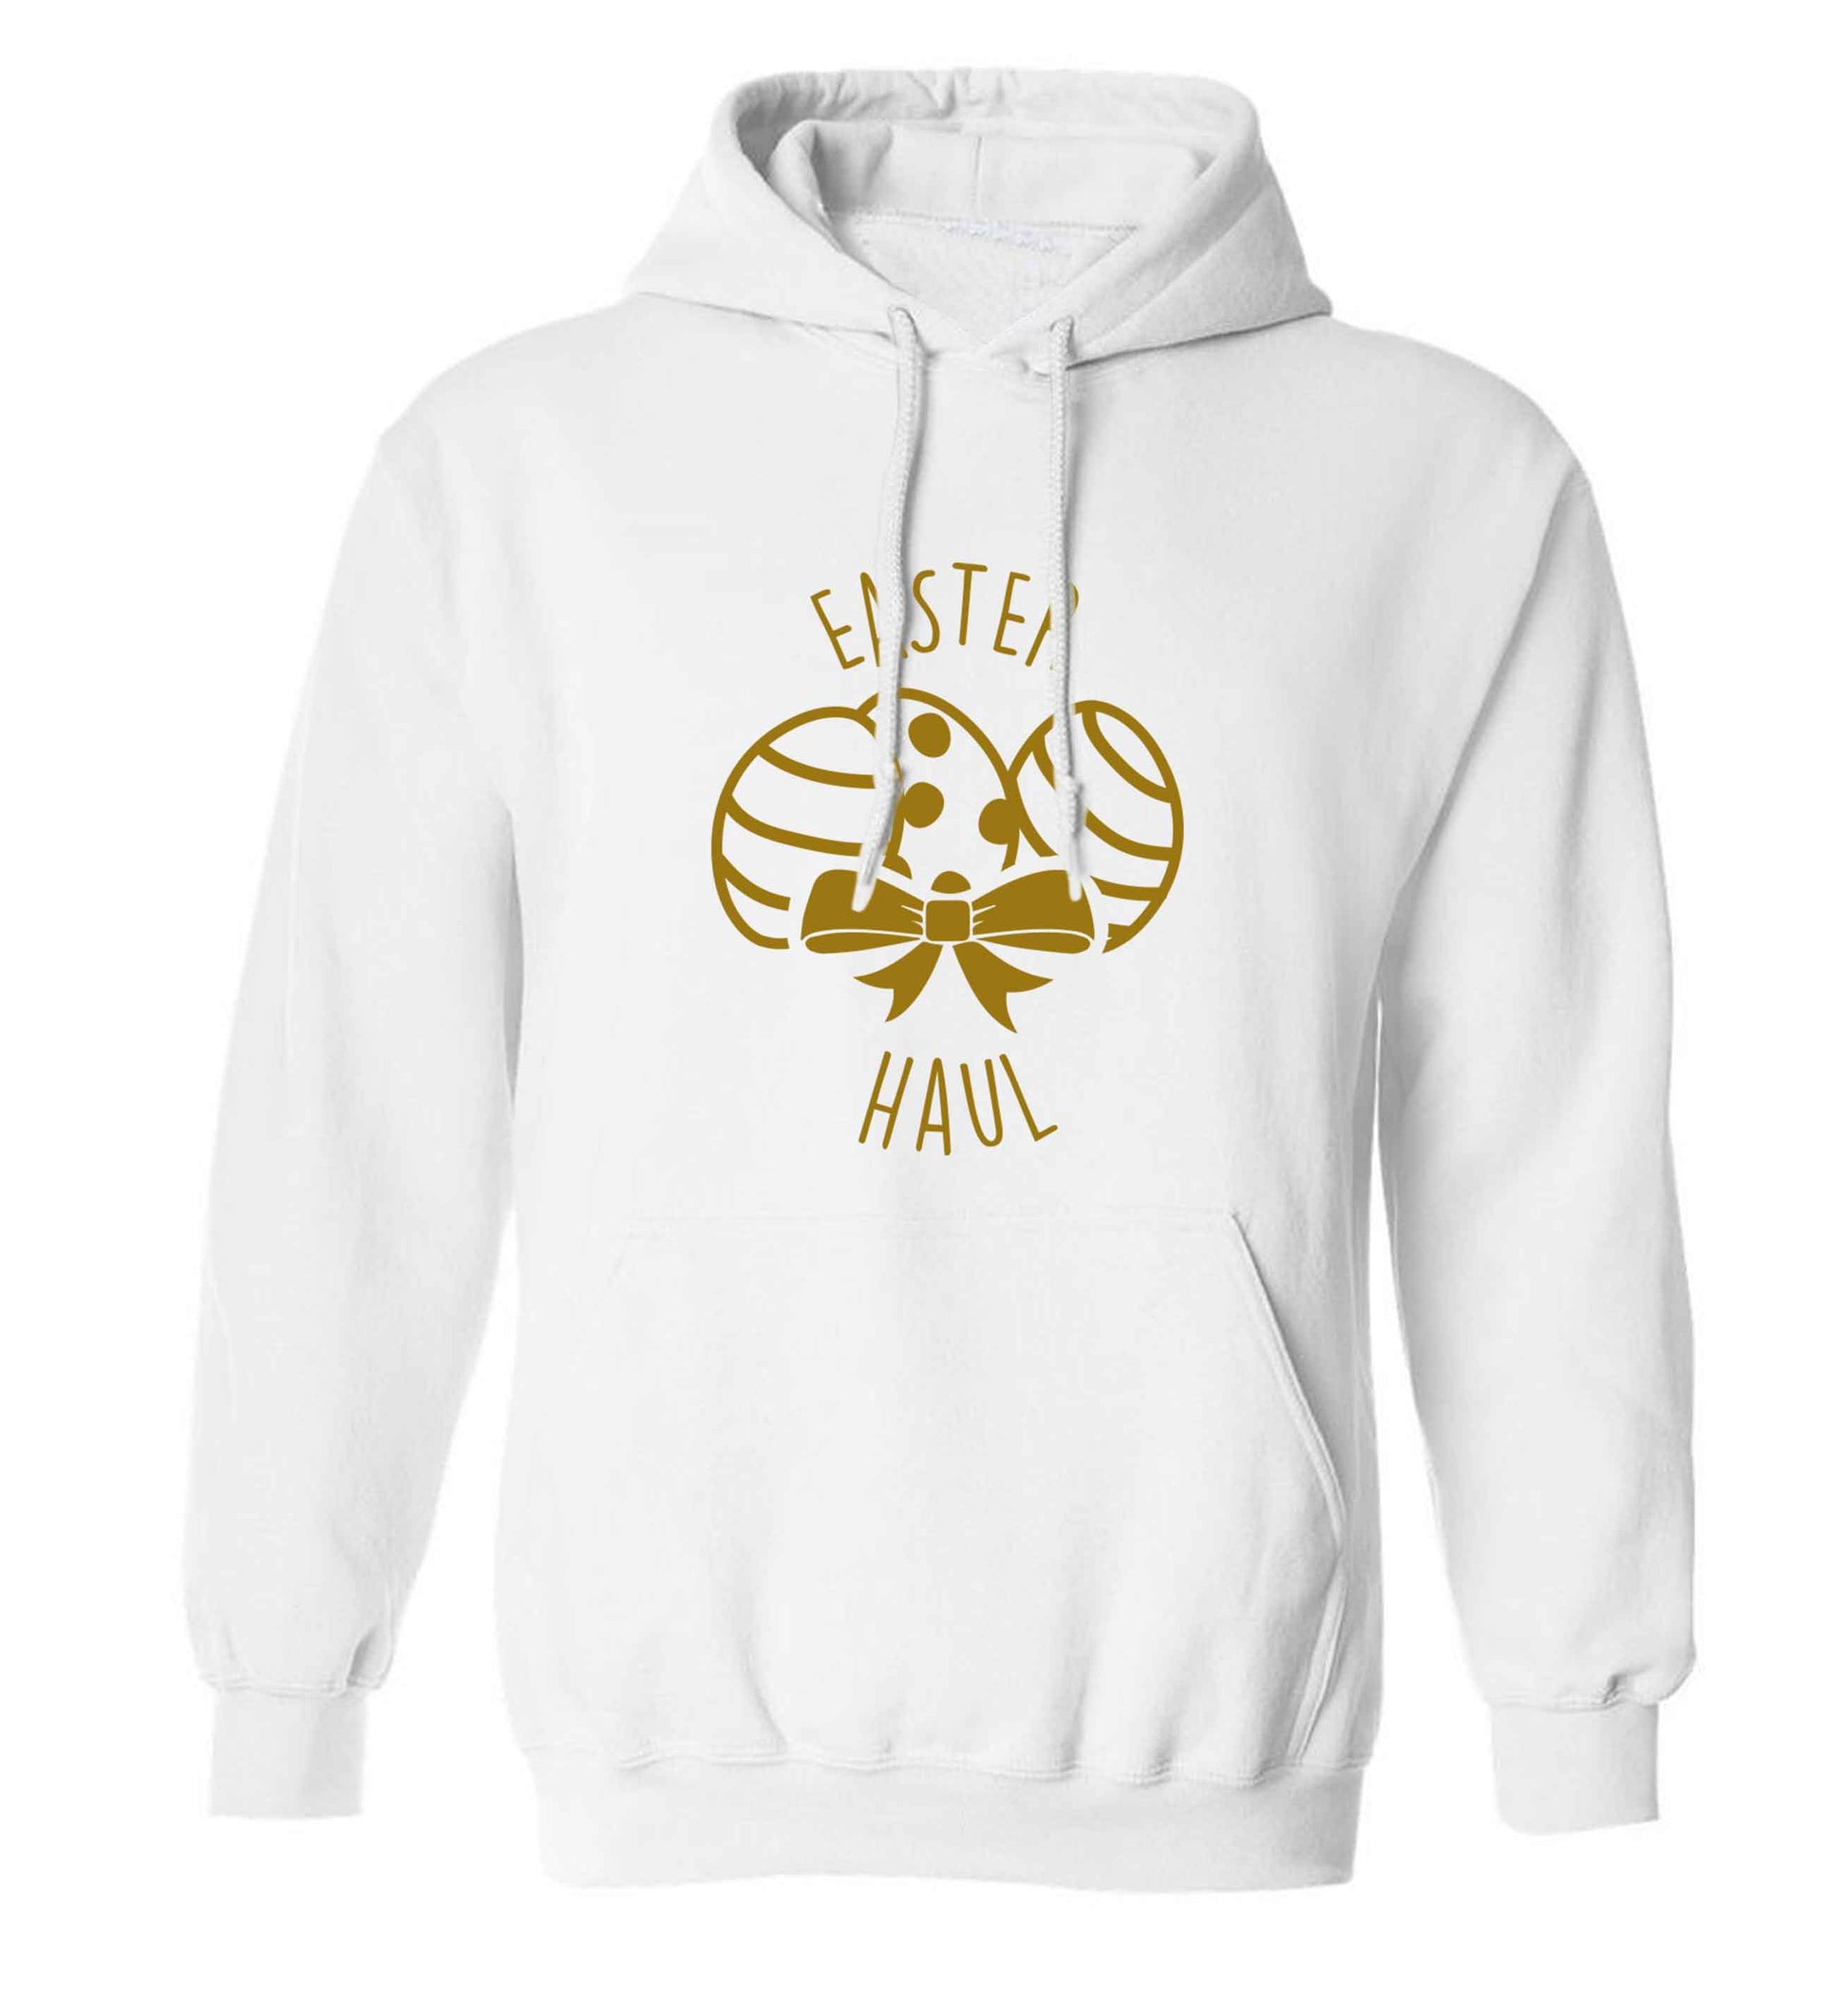 Easter haul adults unisex white hoodie 2XL